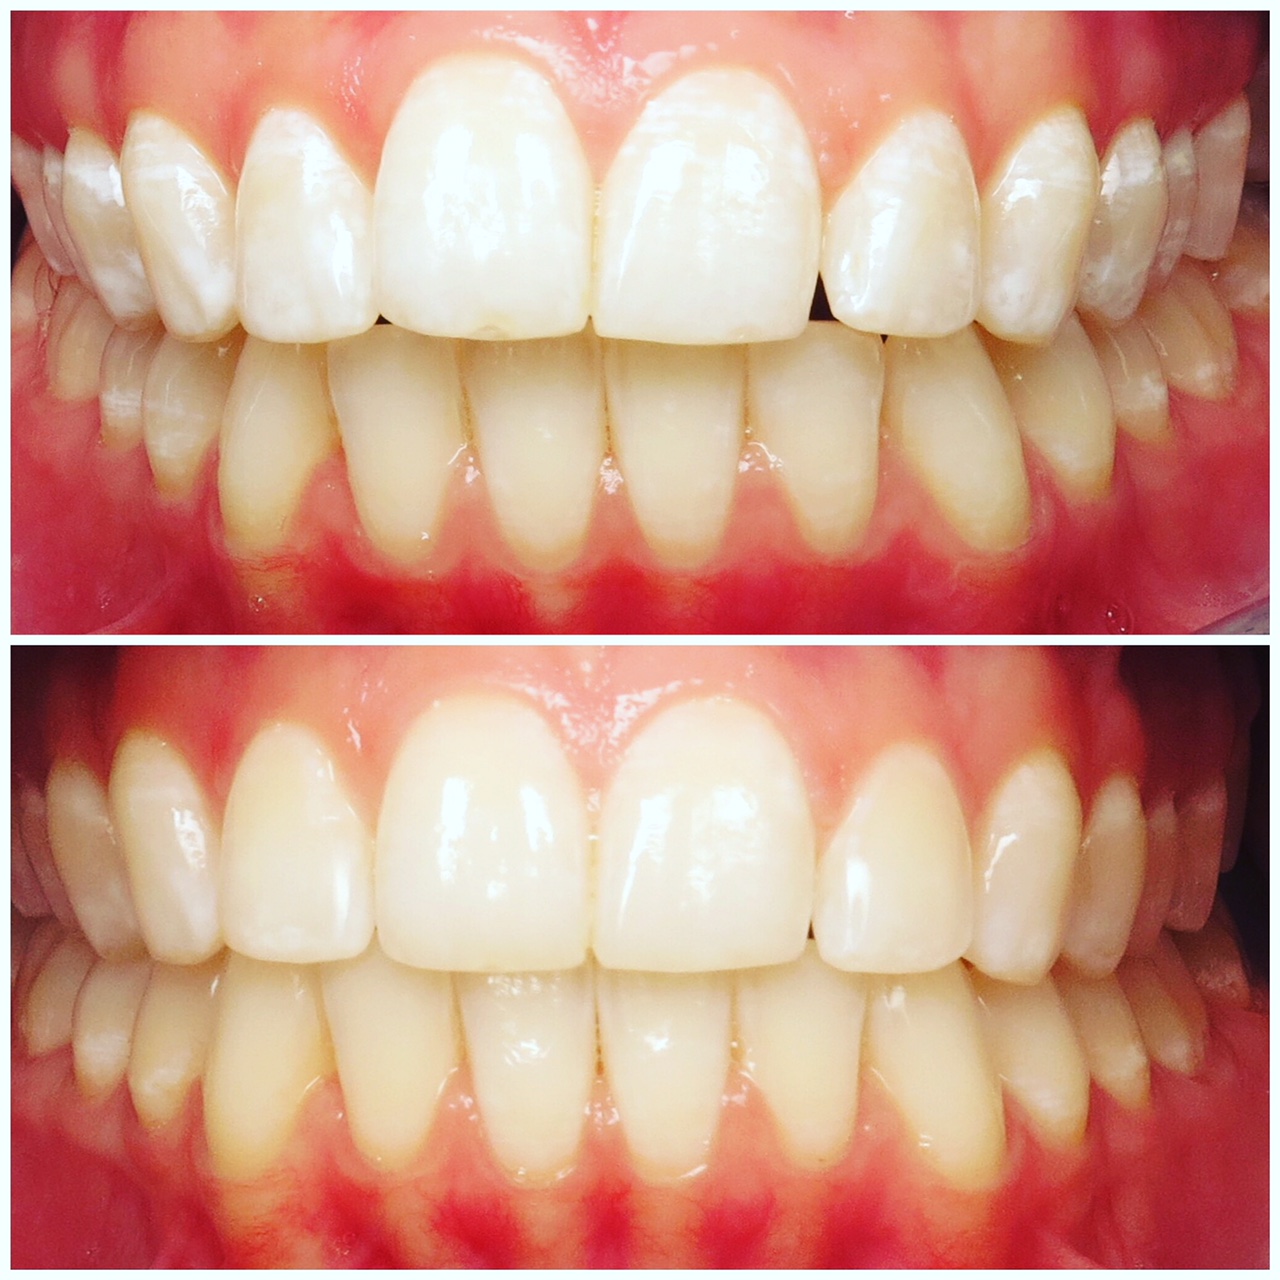 retainer for teeth before and after